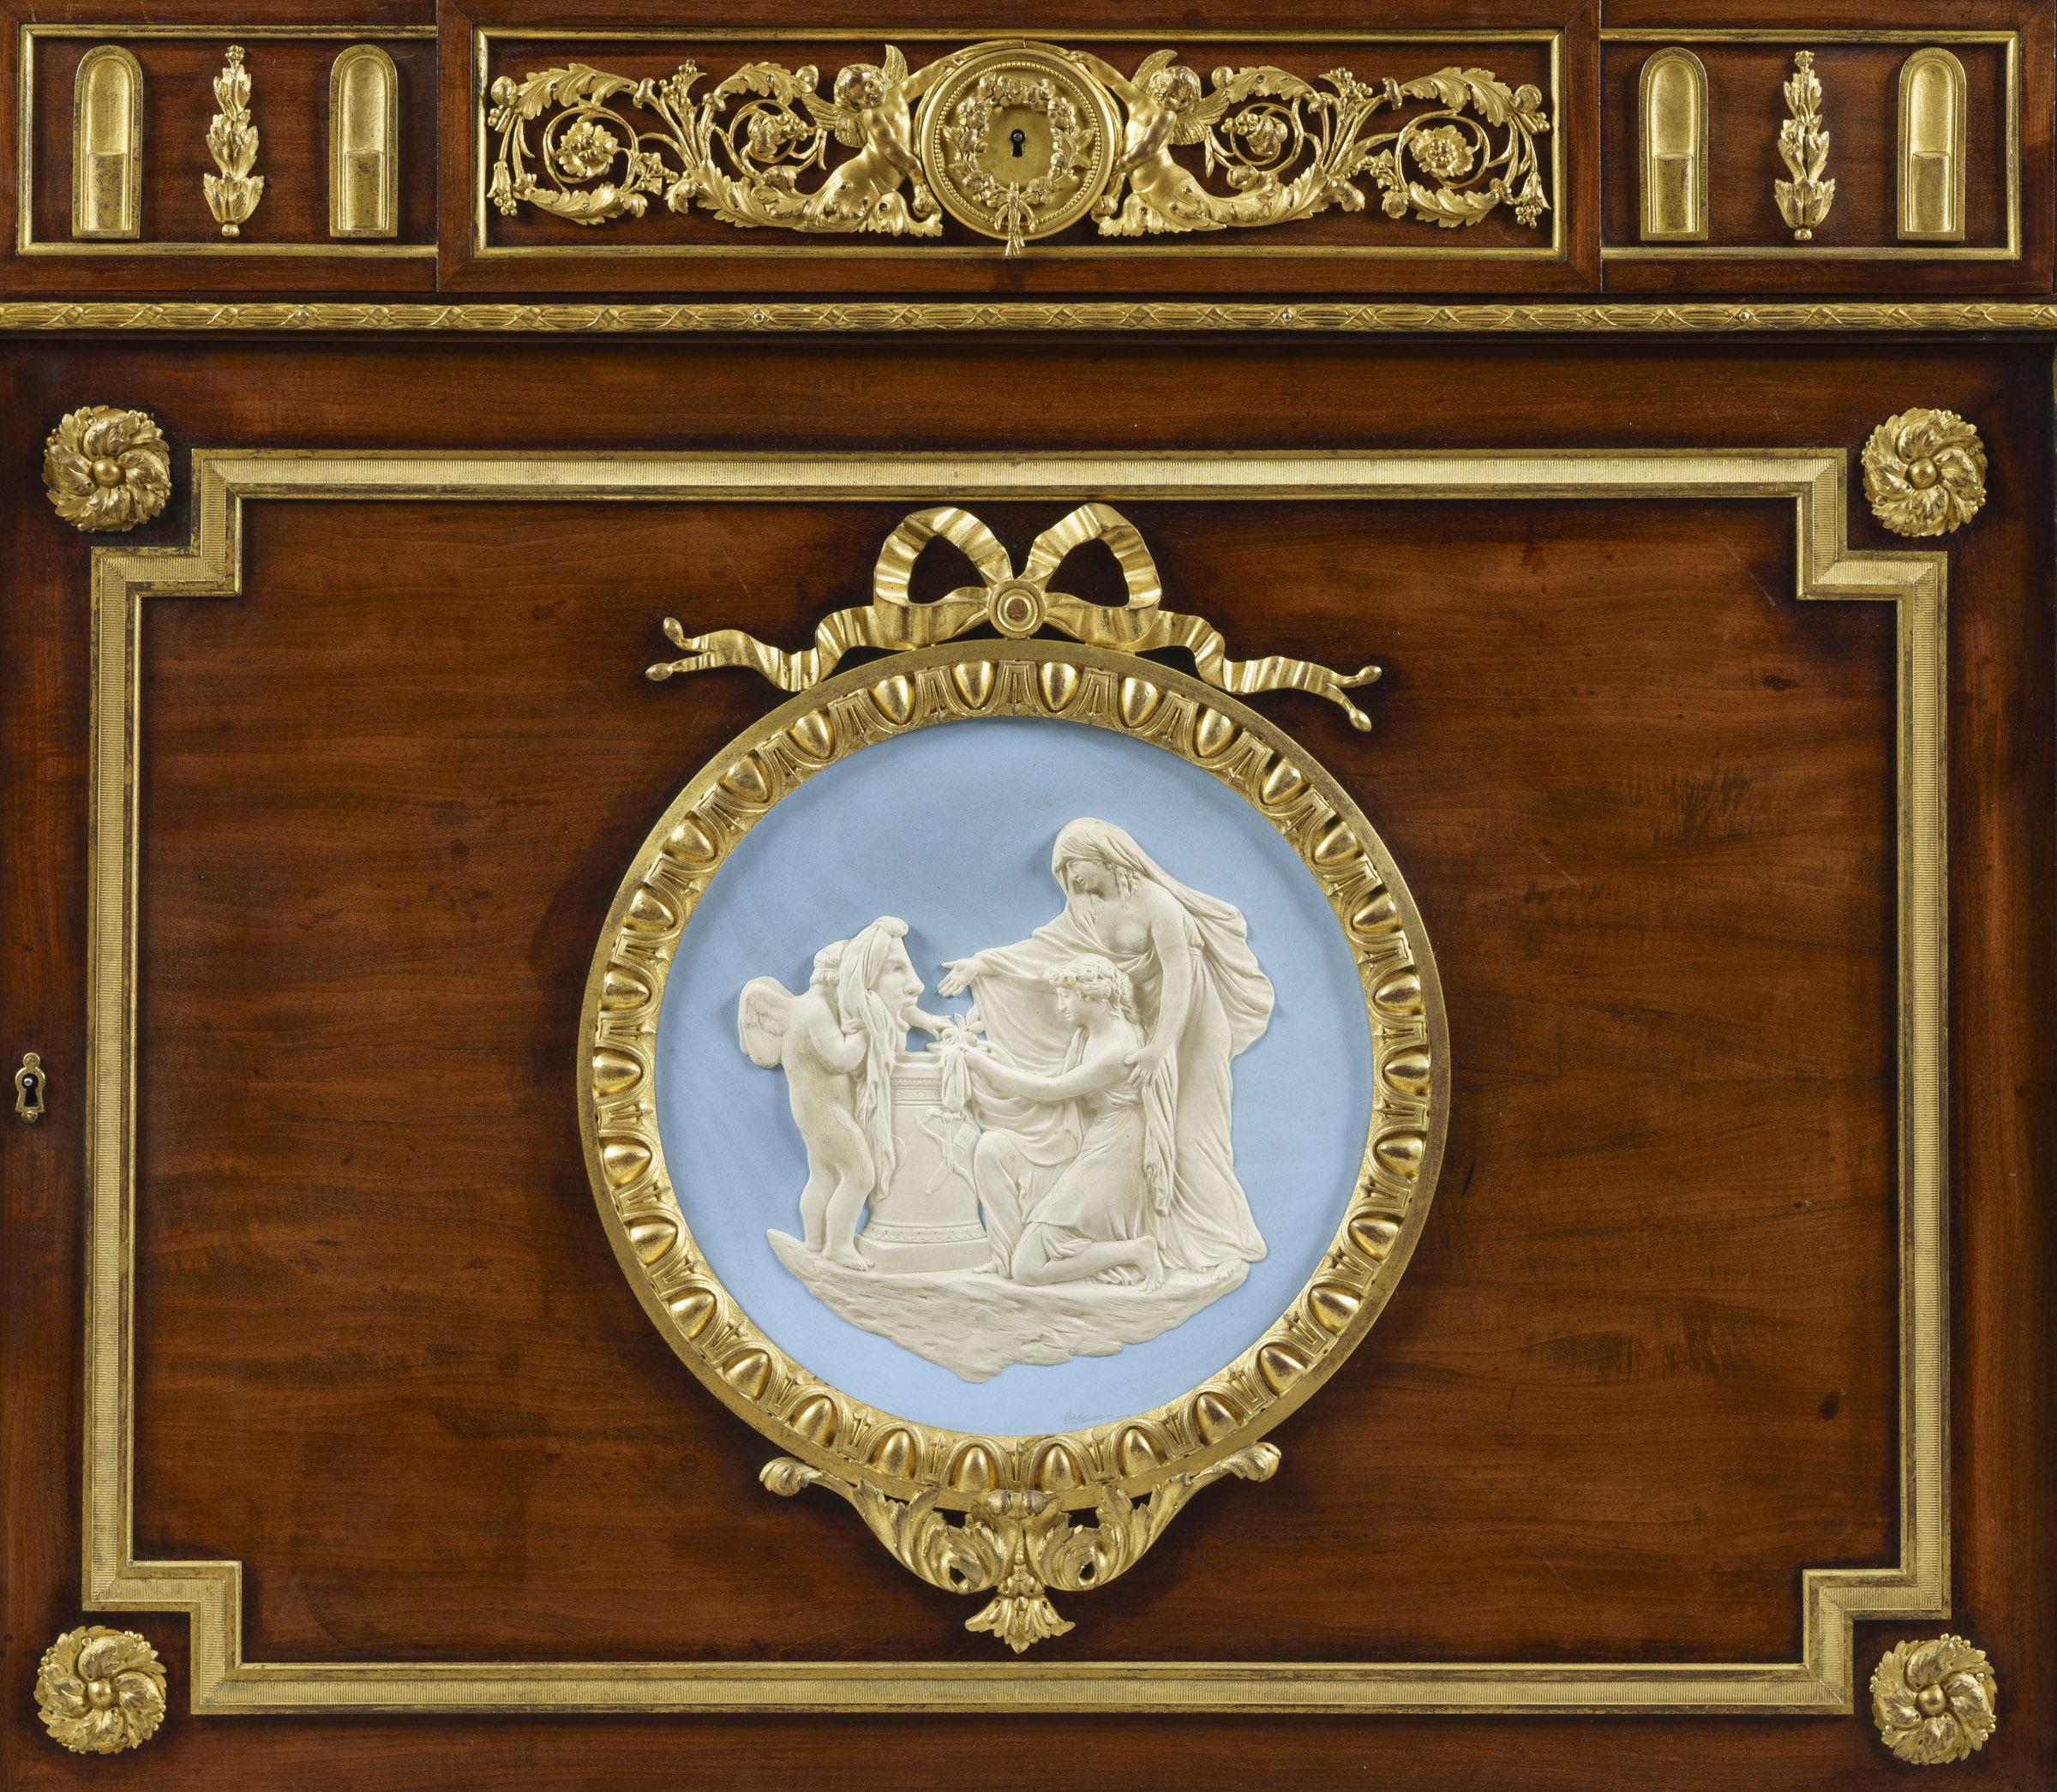 An Ormolu- and Wedgwood Jasperware-Mounted mahogany commode à l'Anglaise
Firmly Attributed to Julius Zwiener

A fine commode an l'anglaise having a shaped marble top inset within a gilt-bronze border, above a frieze applied with finely cast